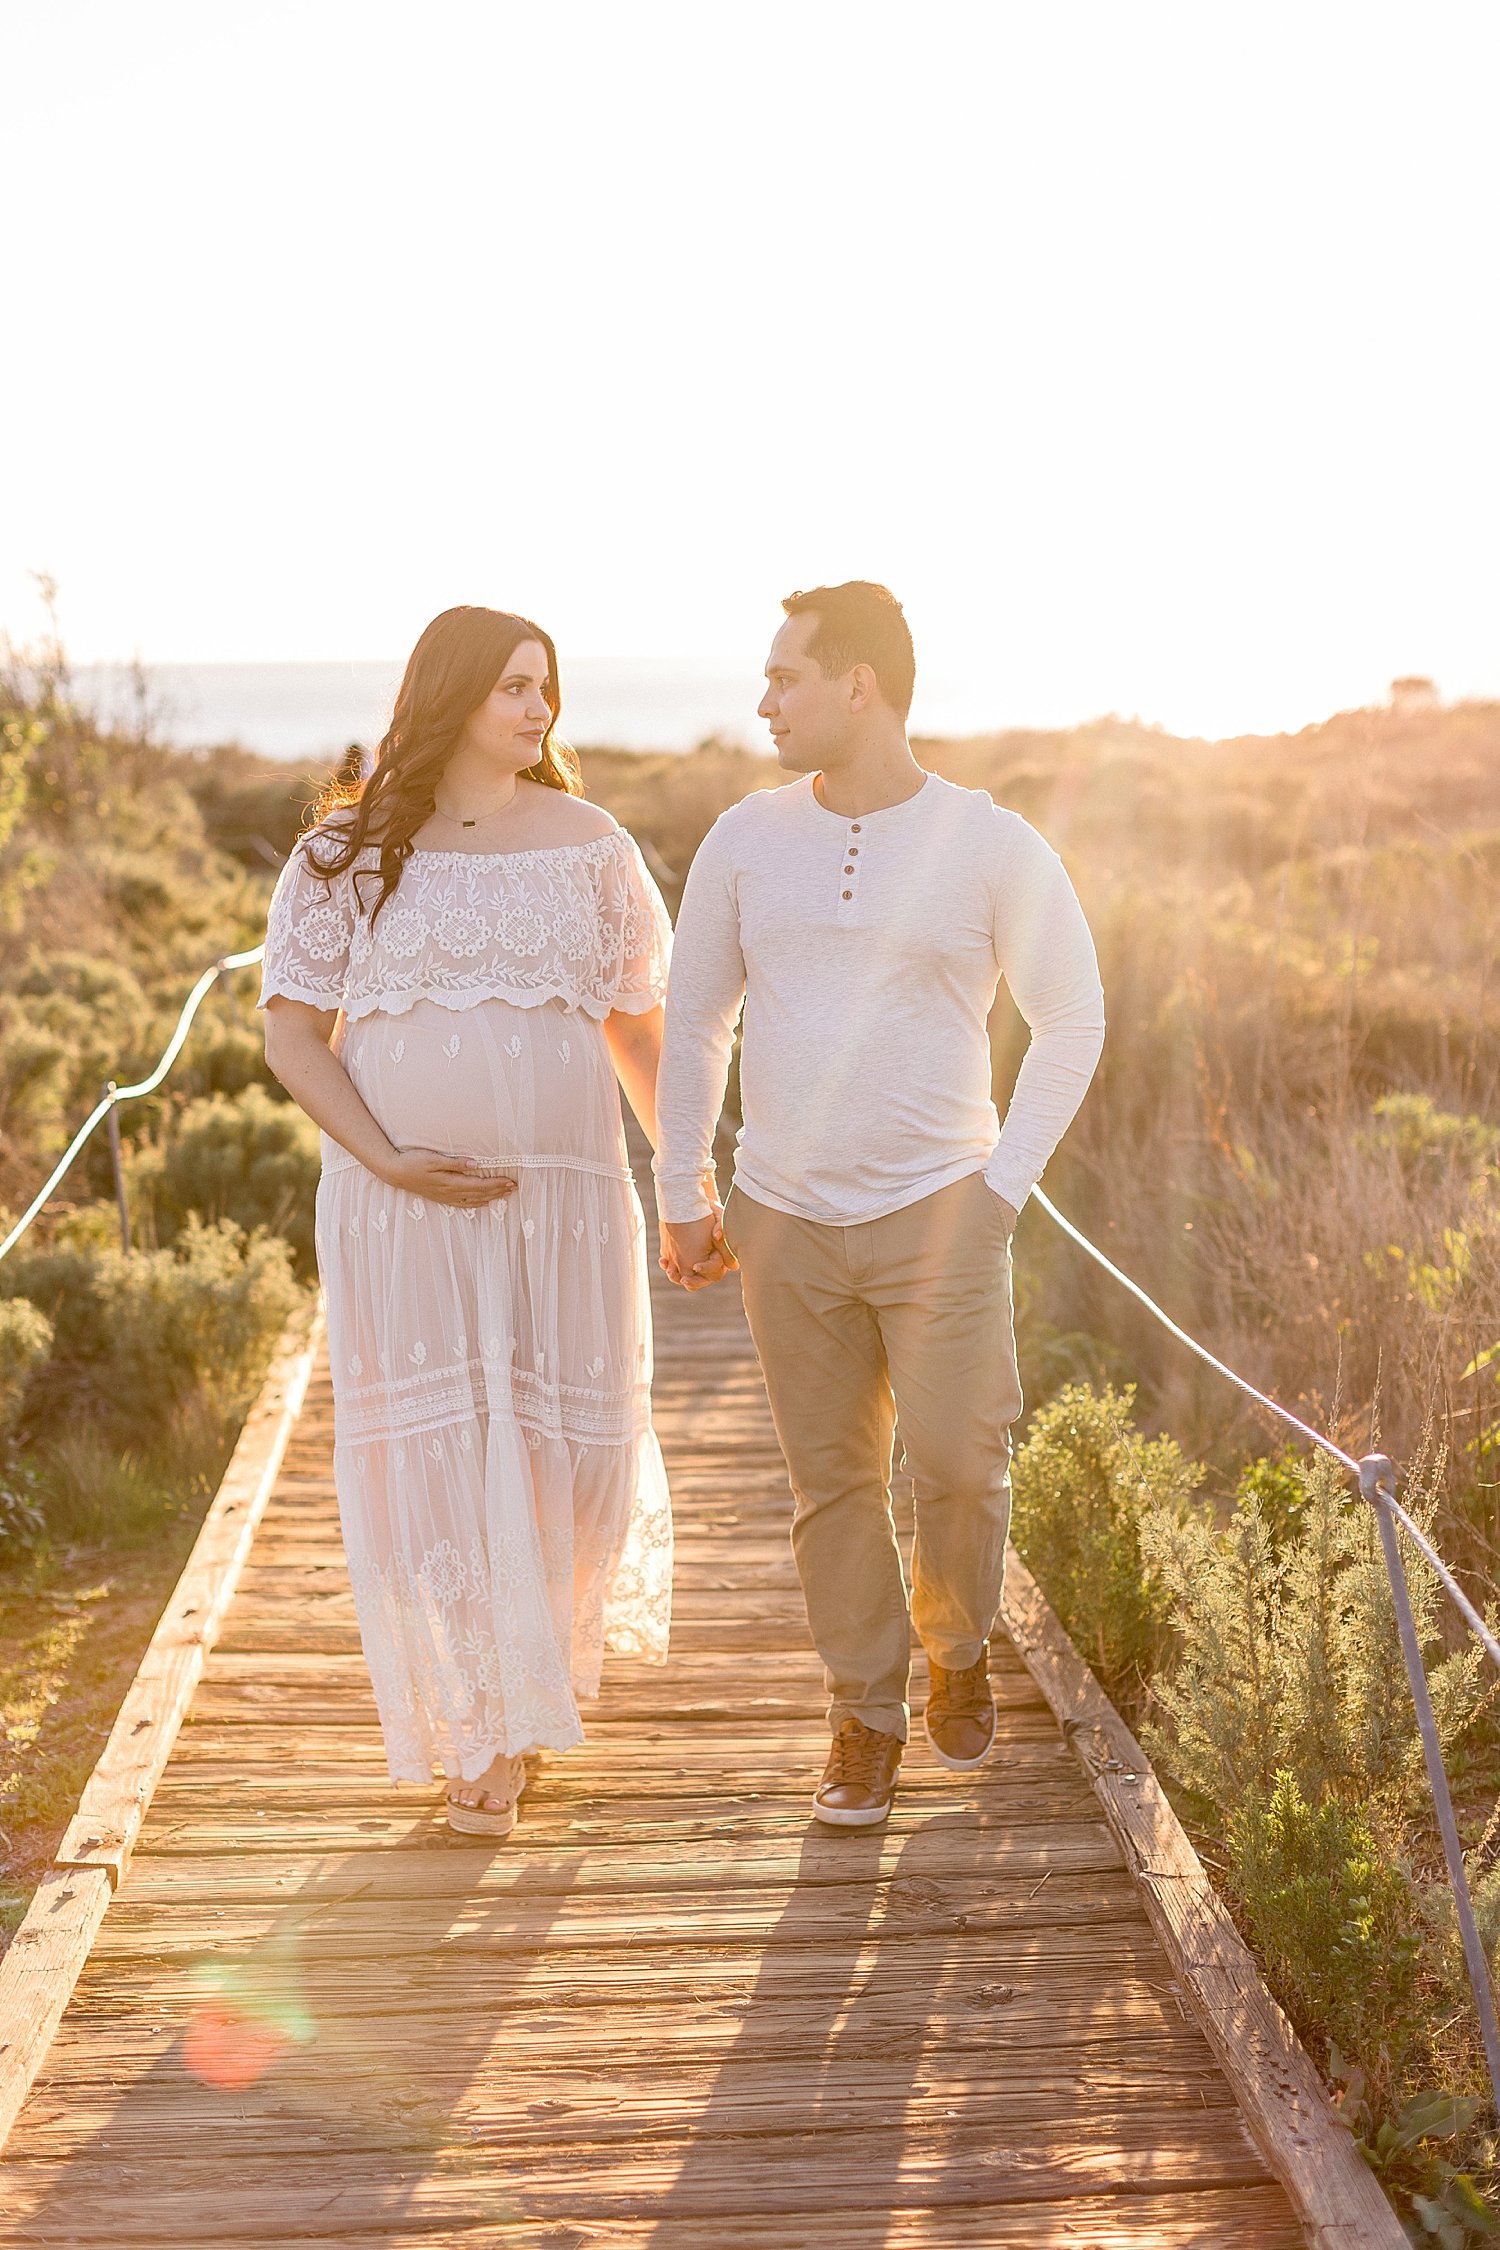 Golden hour at Crystal Cove beach during maternity session | Ambre Williams Photography